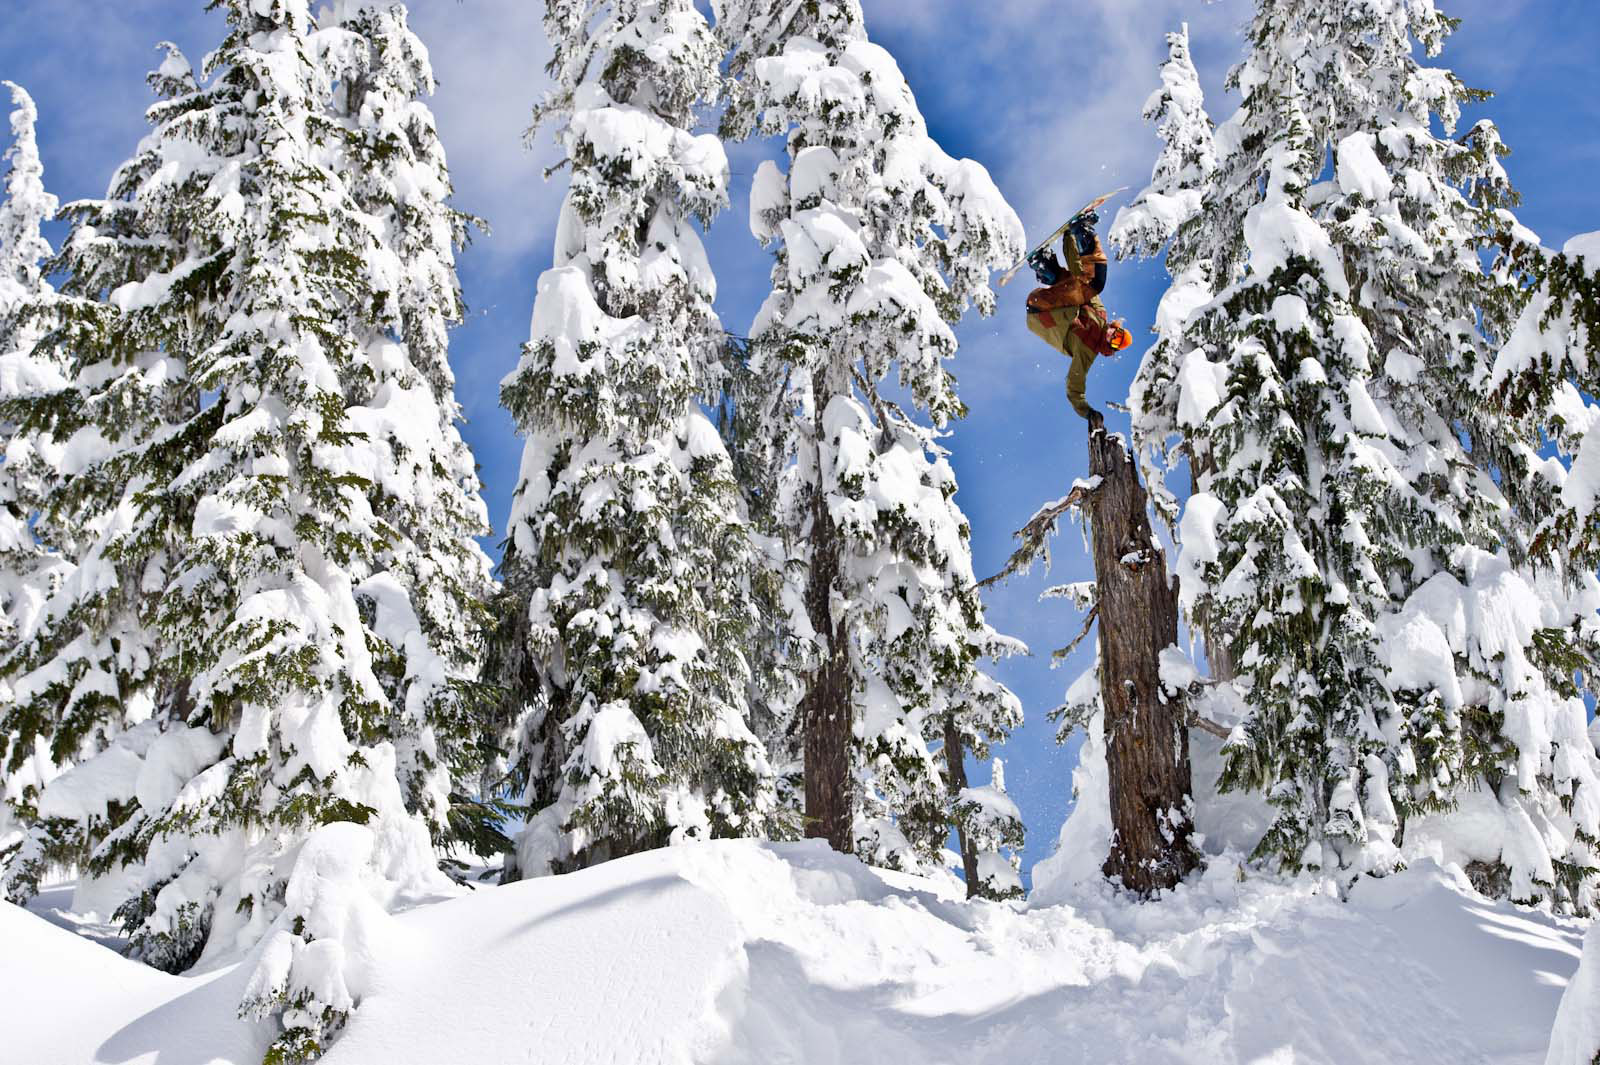 Person jumping on a snowboard in the backcountry of a mountain